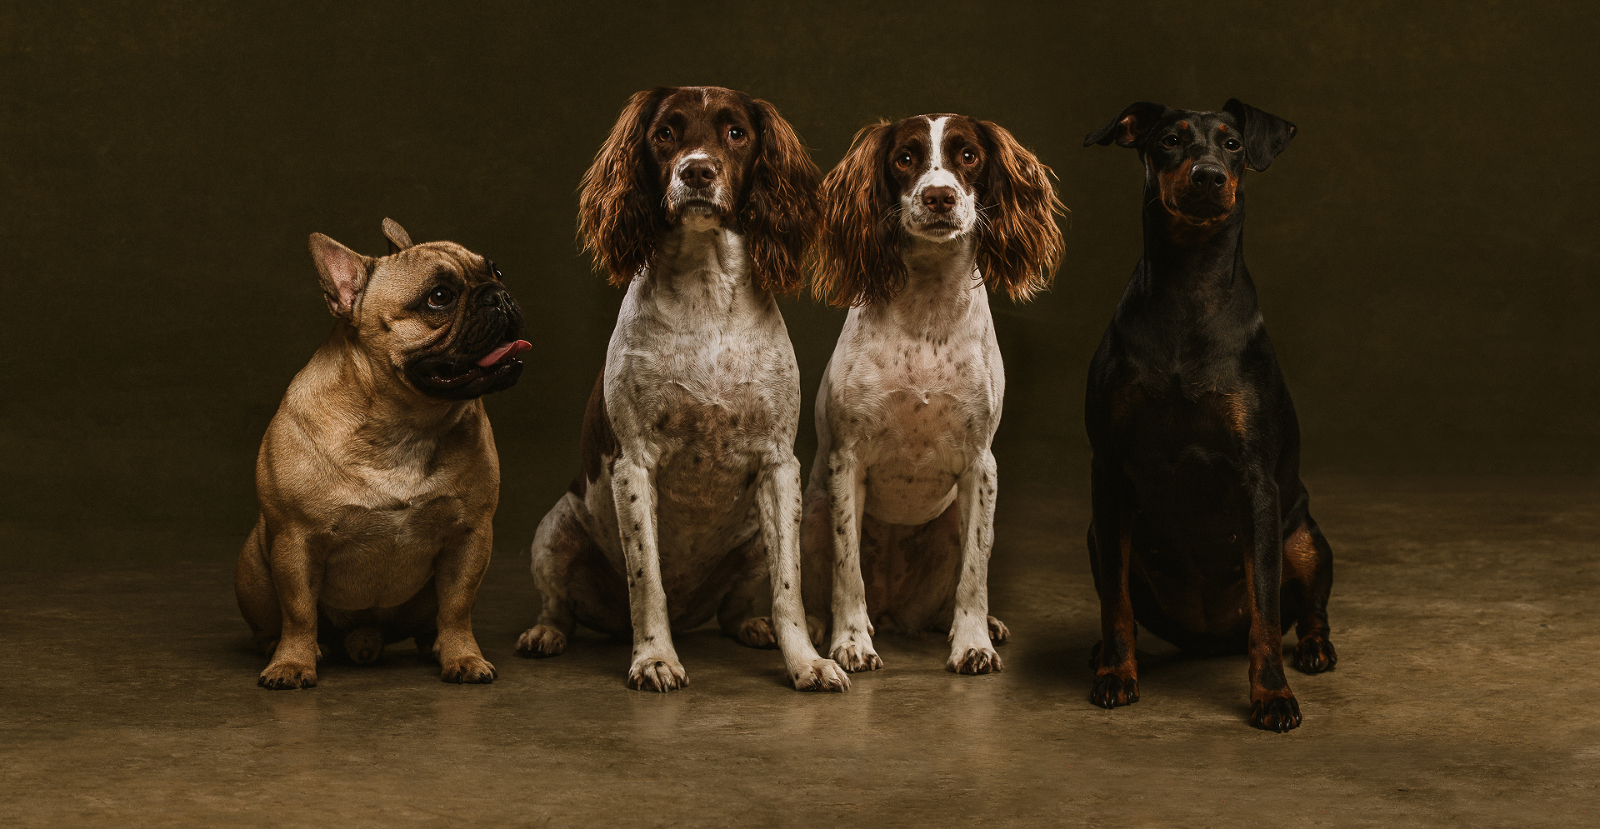 Group Photo of Four Dogs in the Studio on a dark background